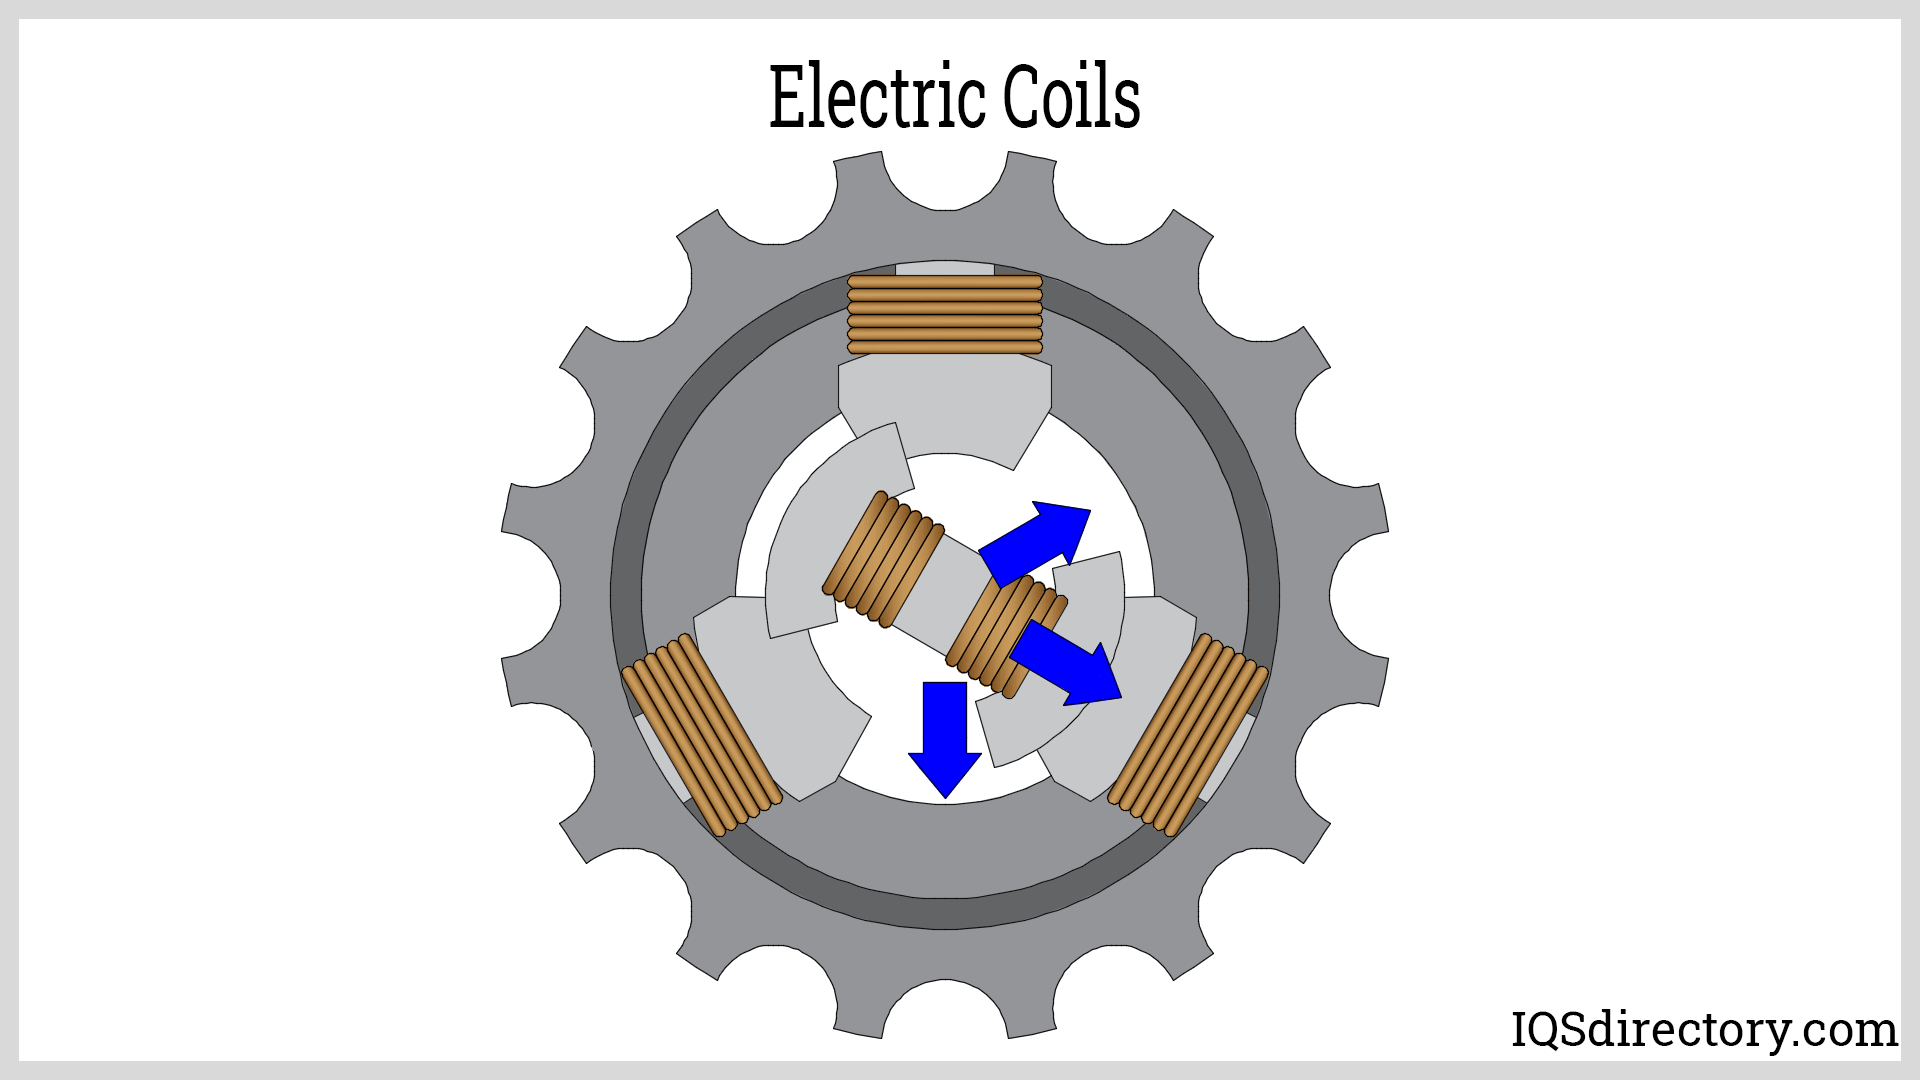 Electric Coils